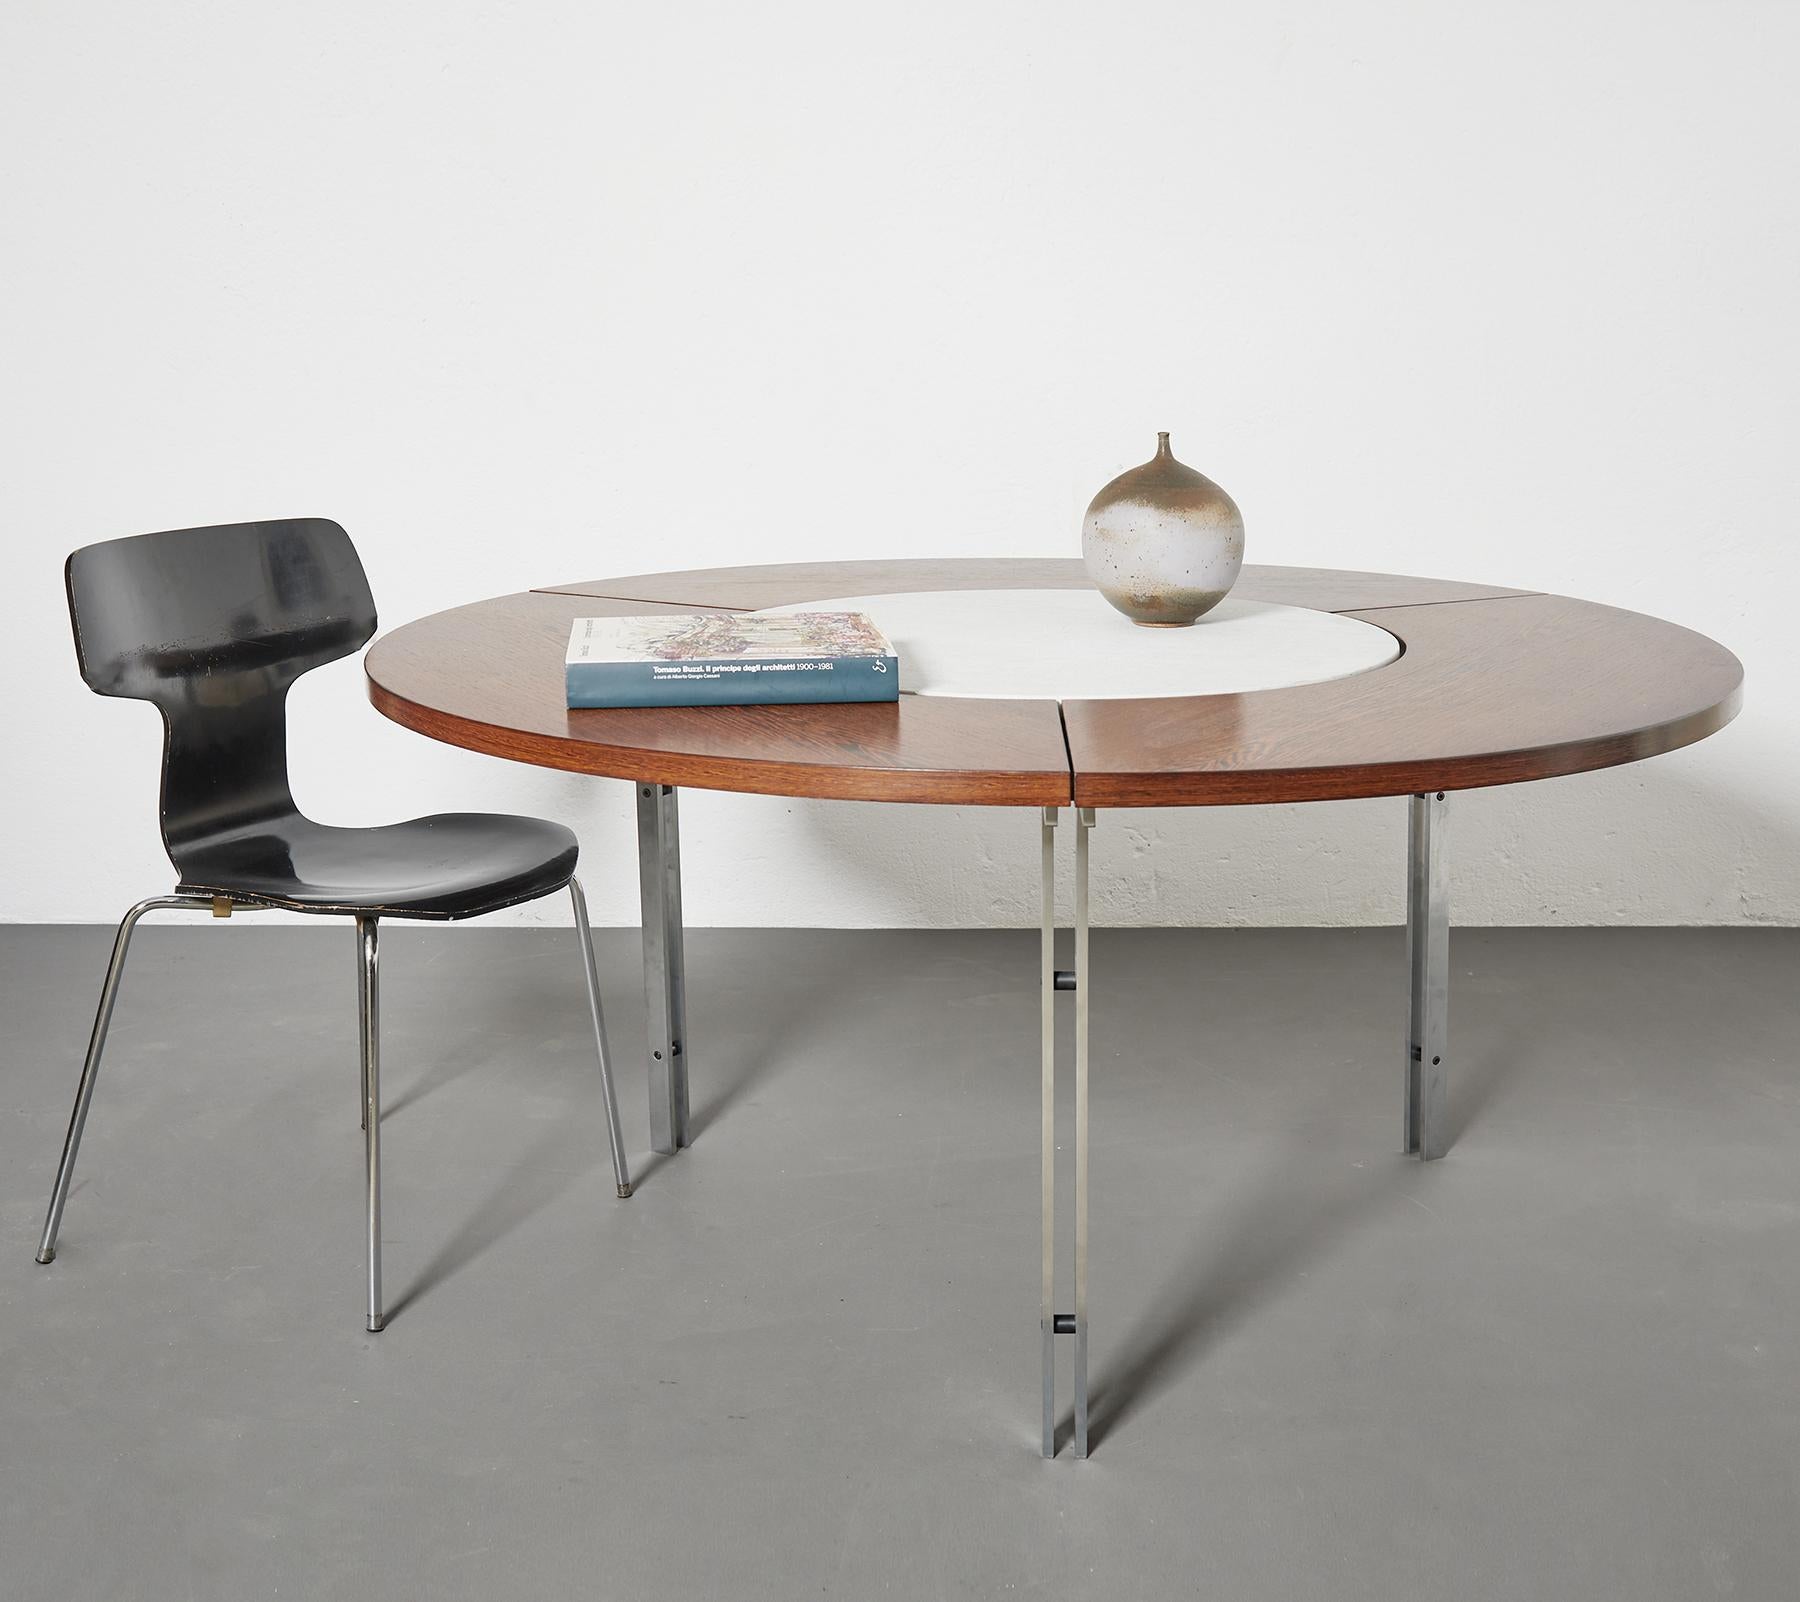 Fabricius & Kastholm dining or conference table by Alfred Kill, Germany 1965

The structure is in brushed matte steel which can be entirely disassembled. 

The table top in wenge wood is composed of three parts and boasts a circular white